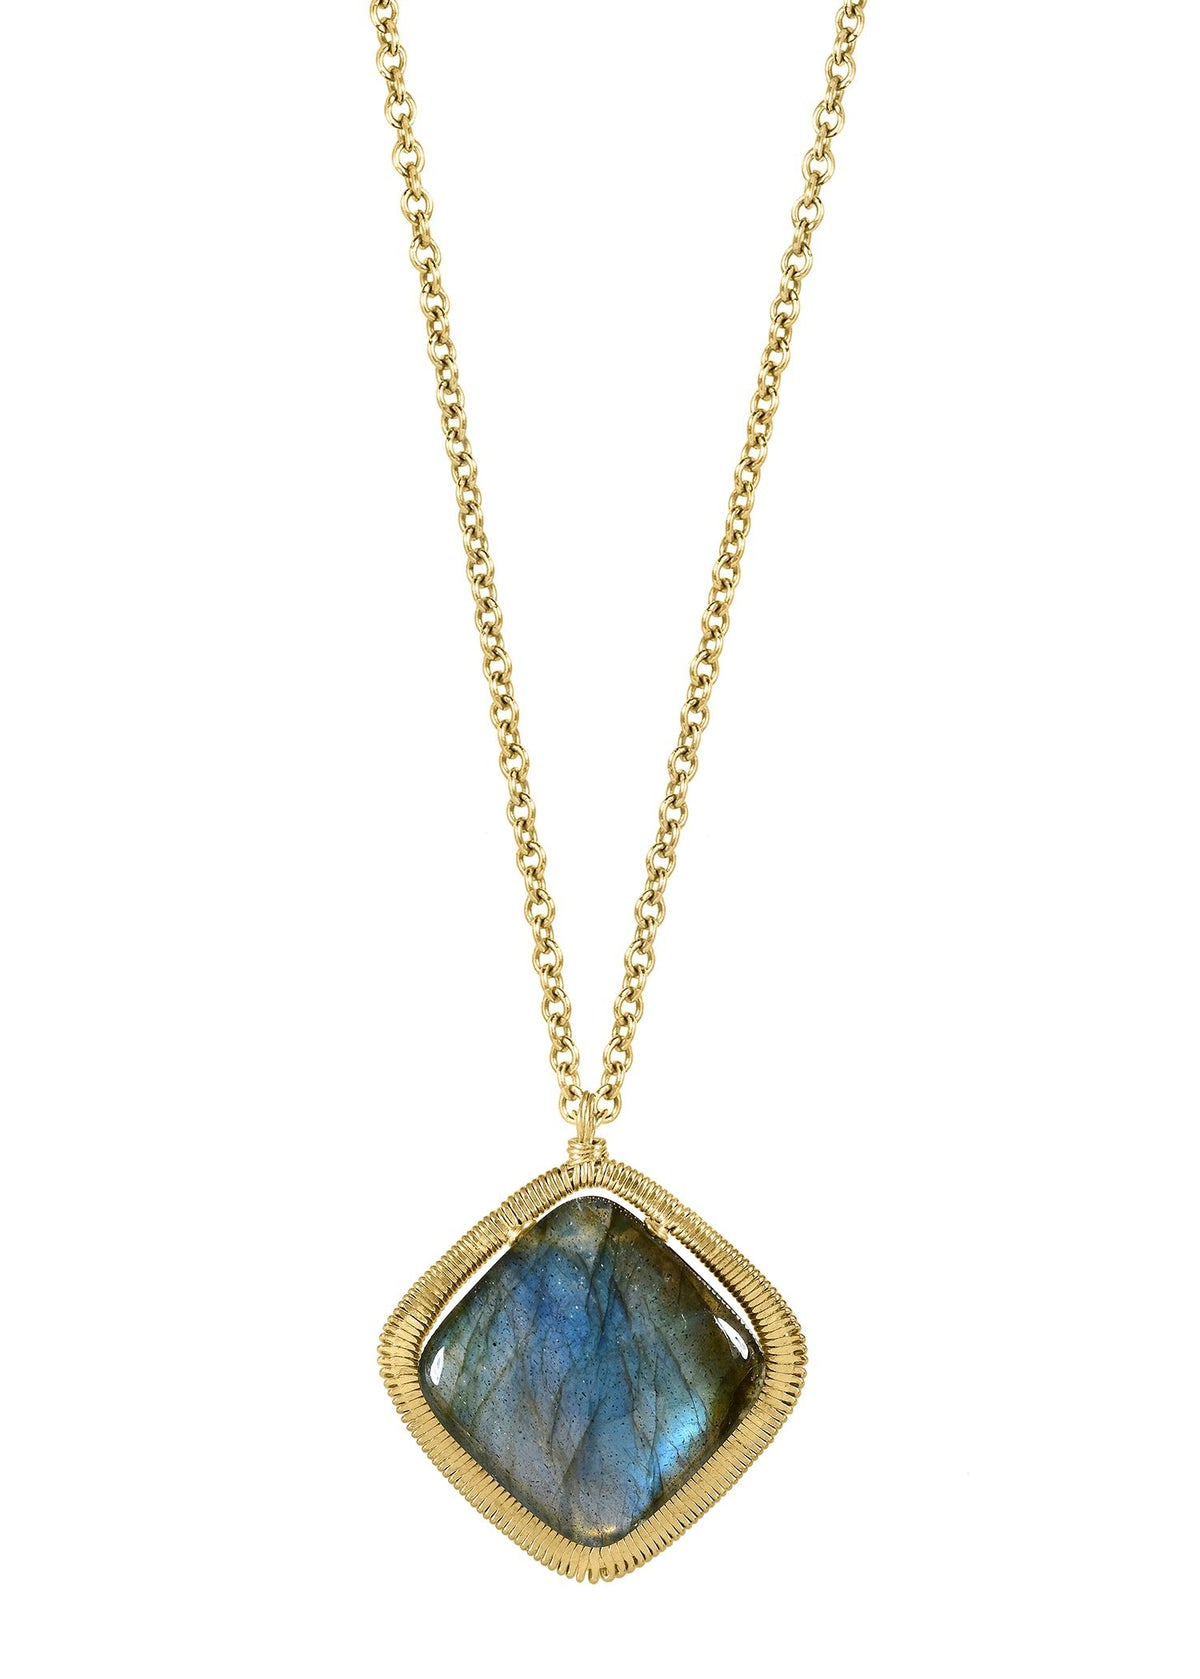 Labradorite 14k gold fill Necklace measures 17-1/4&quot; in length Pendant measures 13/16&quot; in length and 13/16&quot; in width Handmade in our Los Angeles studio